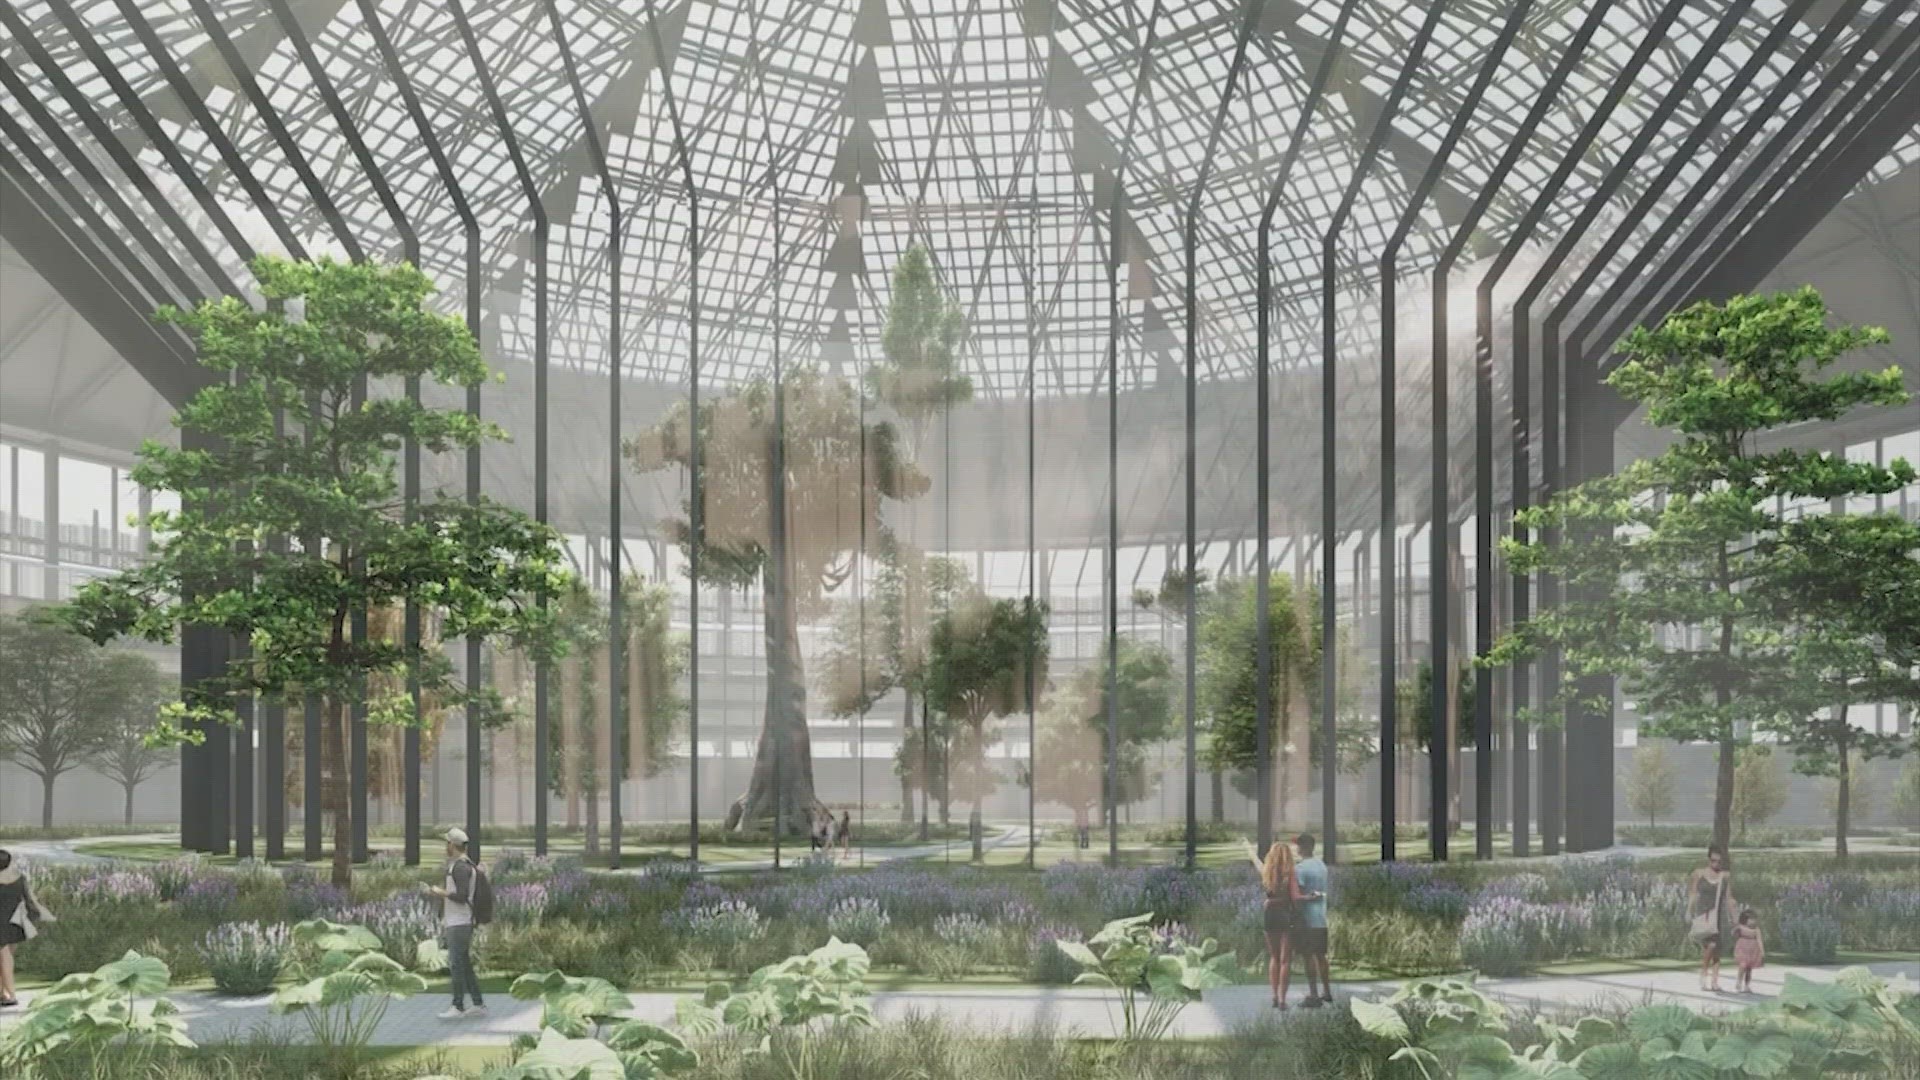 The design plan turns the Dome into an indoor public street with a botanical garden, 77,000 square feet of retail space, 500 hotel rooms and an immersive museum.